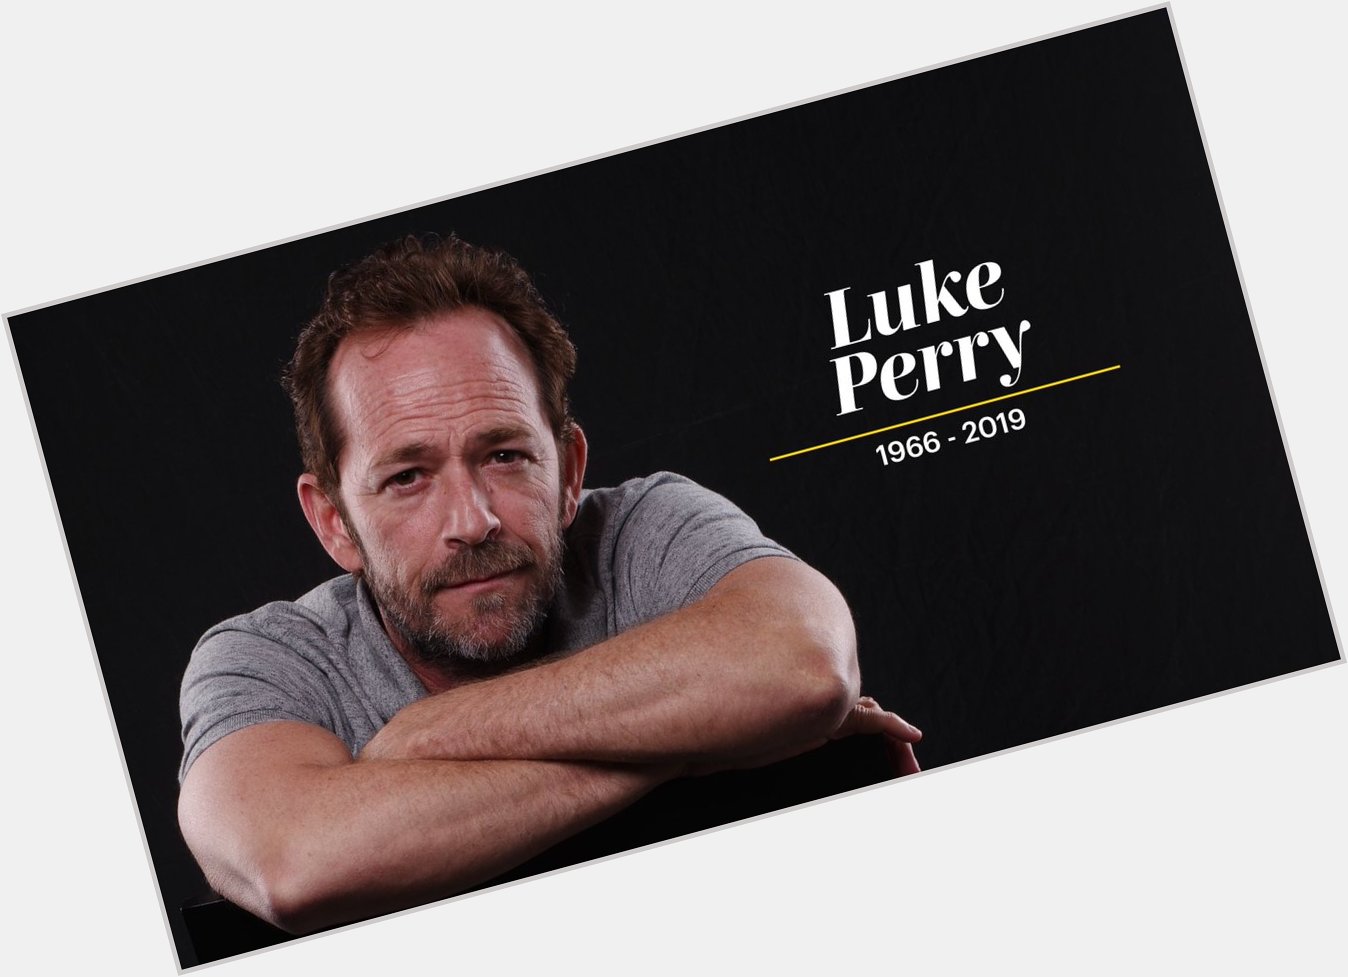 Tribute Happy Birthday! Luke Perry

(October 11 ,1966 - March 4, 2019) RIP!   